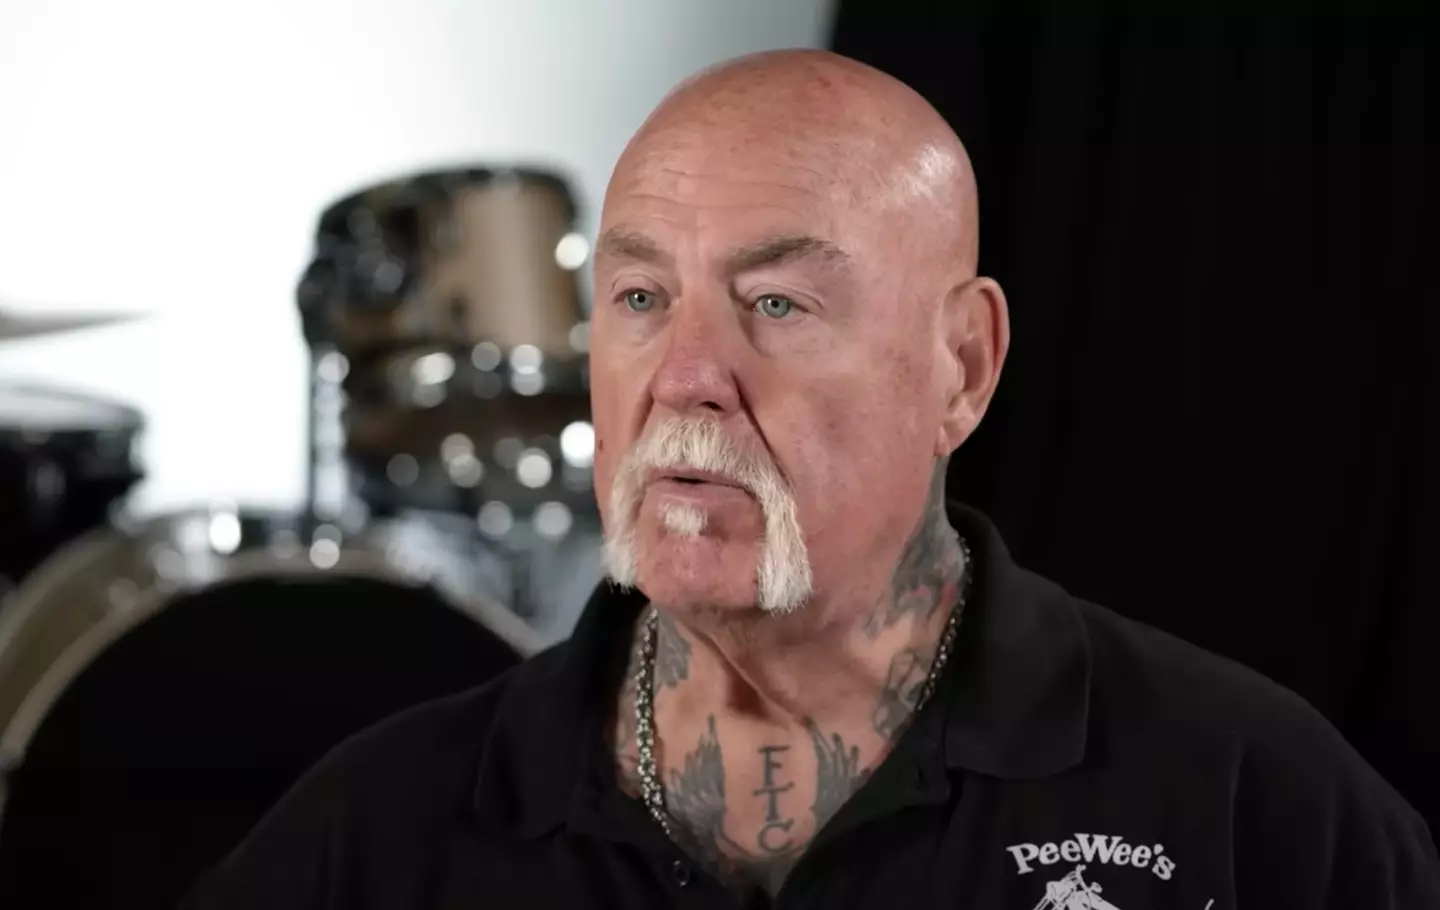 Charles 'Peewee' Goldsmith revealed what life was like as a leader of Hells Angels. (VLAD TV)